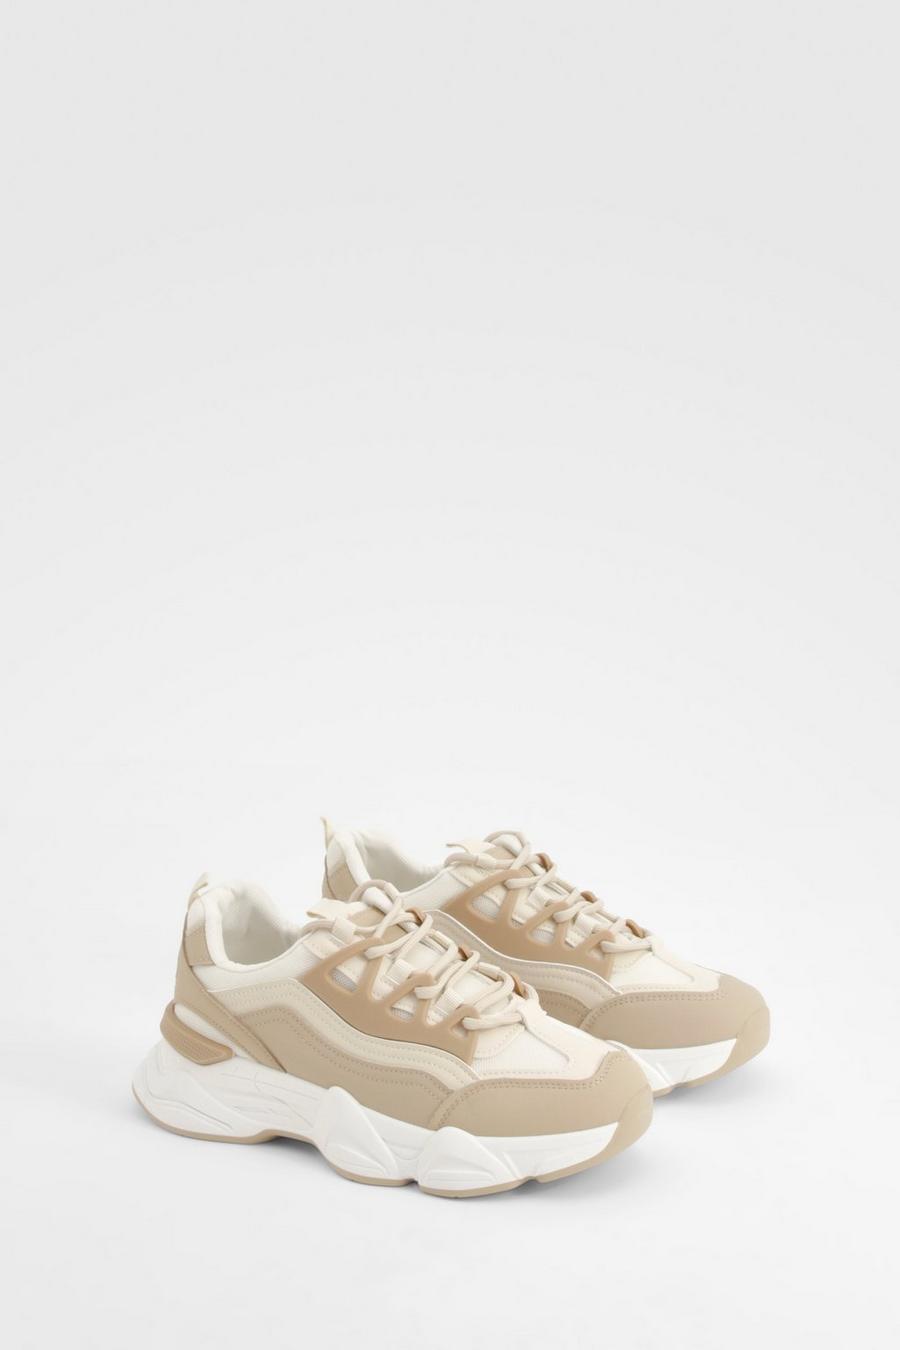 Camel Chunky Sole Panelled Sporty Trainers     